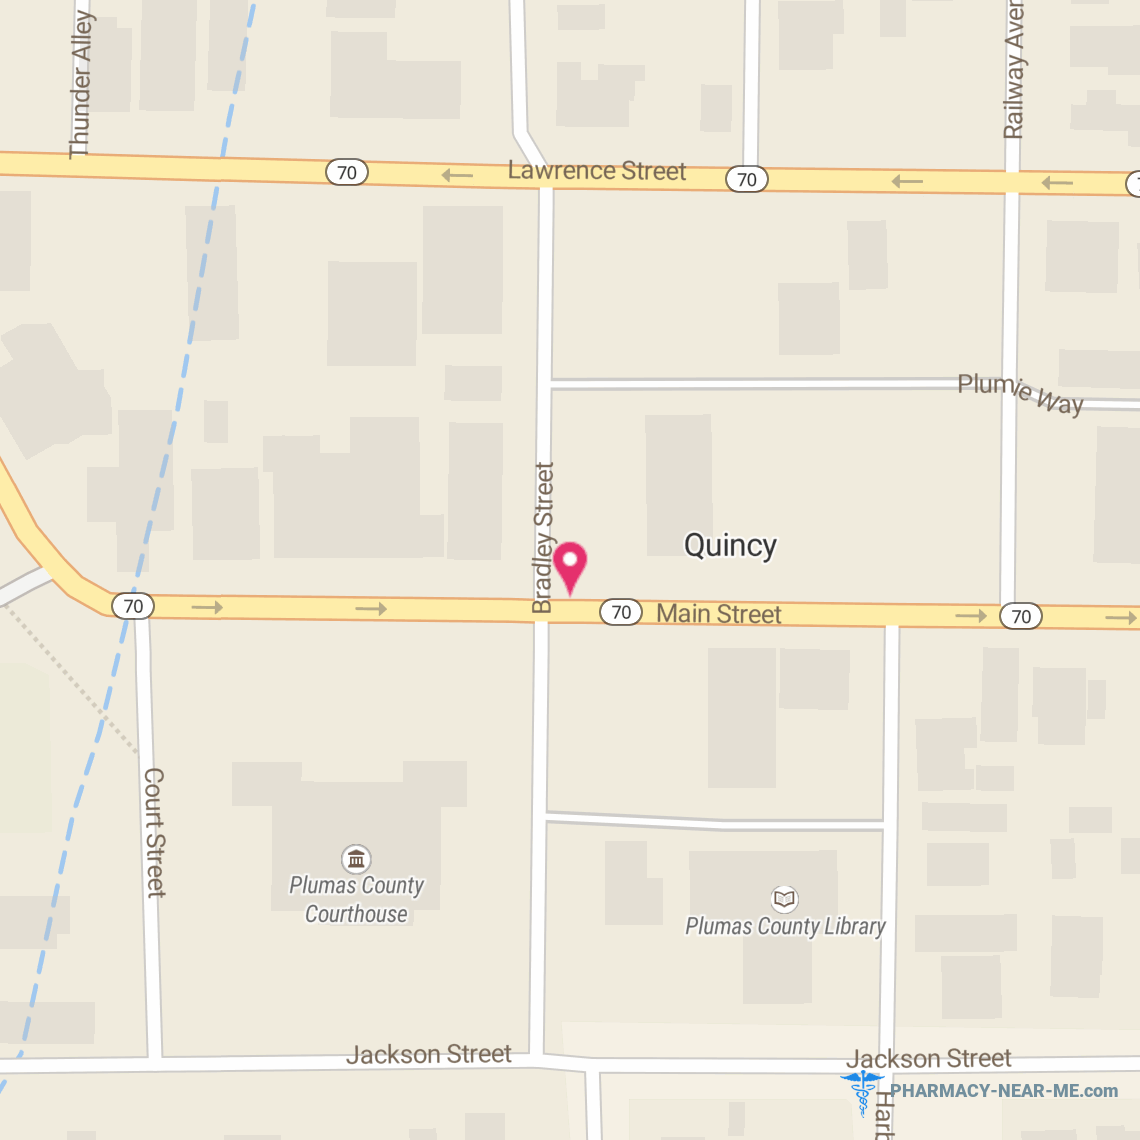 QUINCY DRUG STORE - Pharmacy Hours, Phone, Reviews & Information: 493 Main Street, Quincy, California 95971, United States